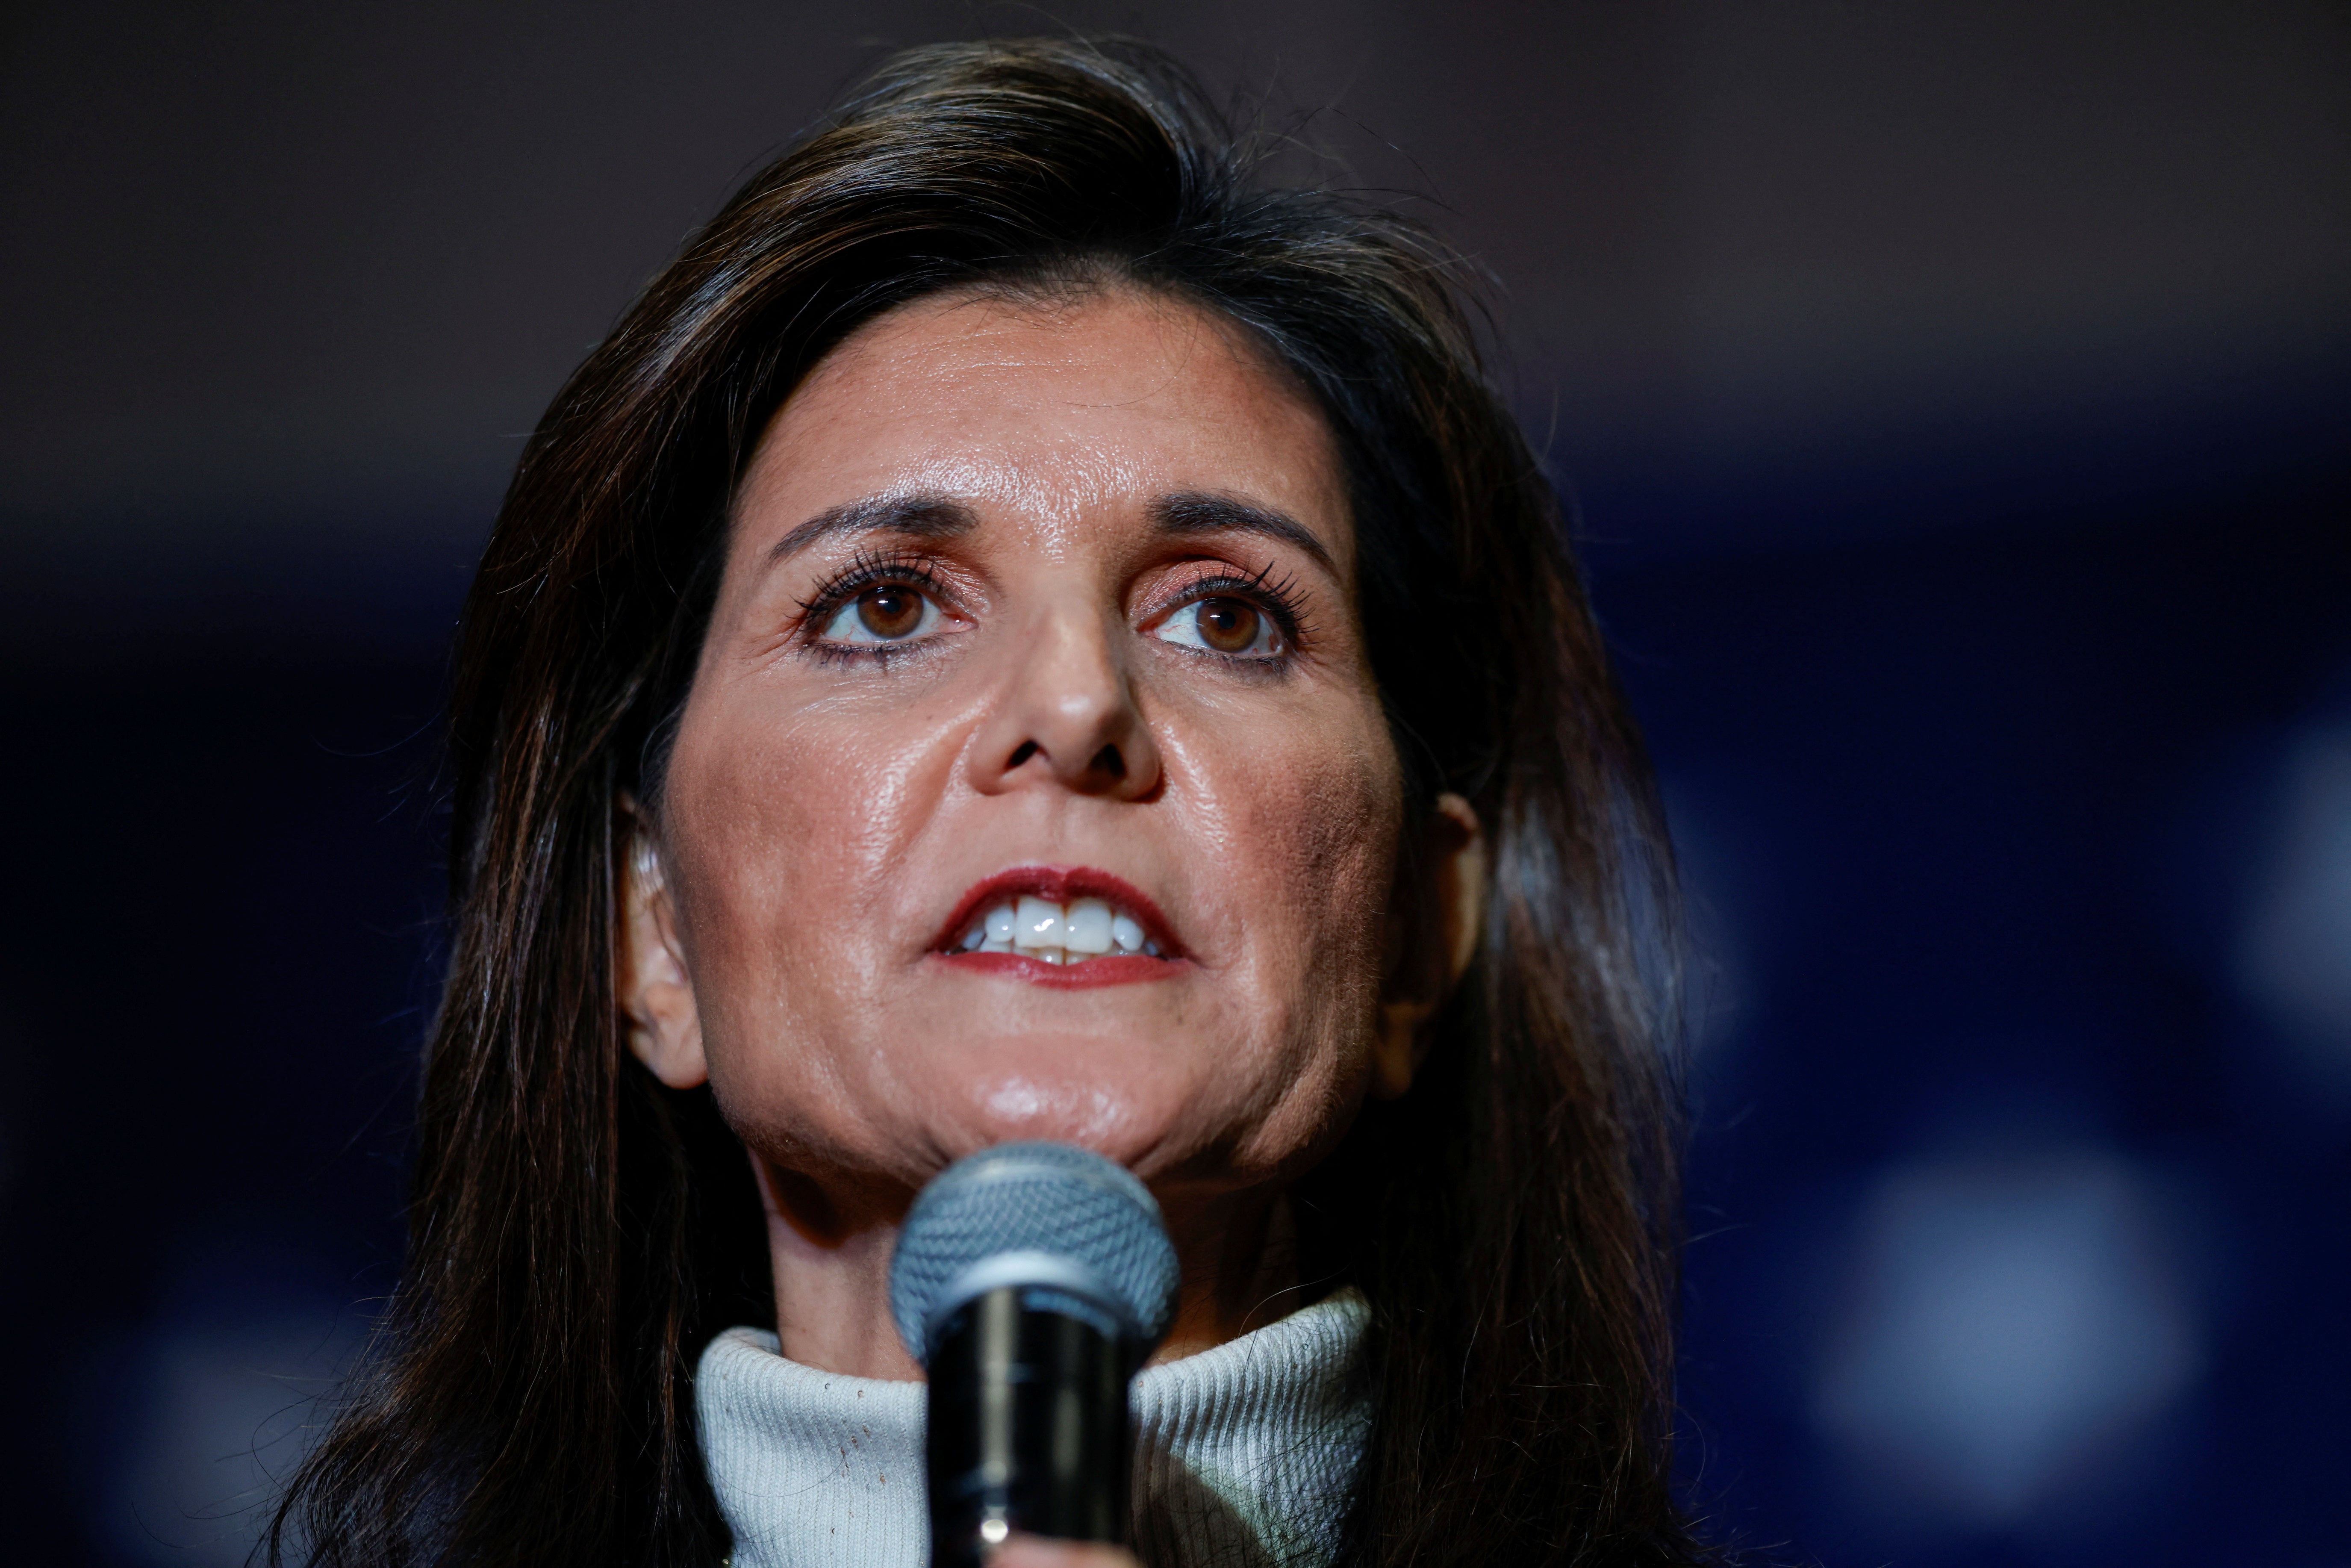 Republican presidential candidate and former US Ambassador to the United Nations, Nikki Haley was swatted twice last month